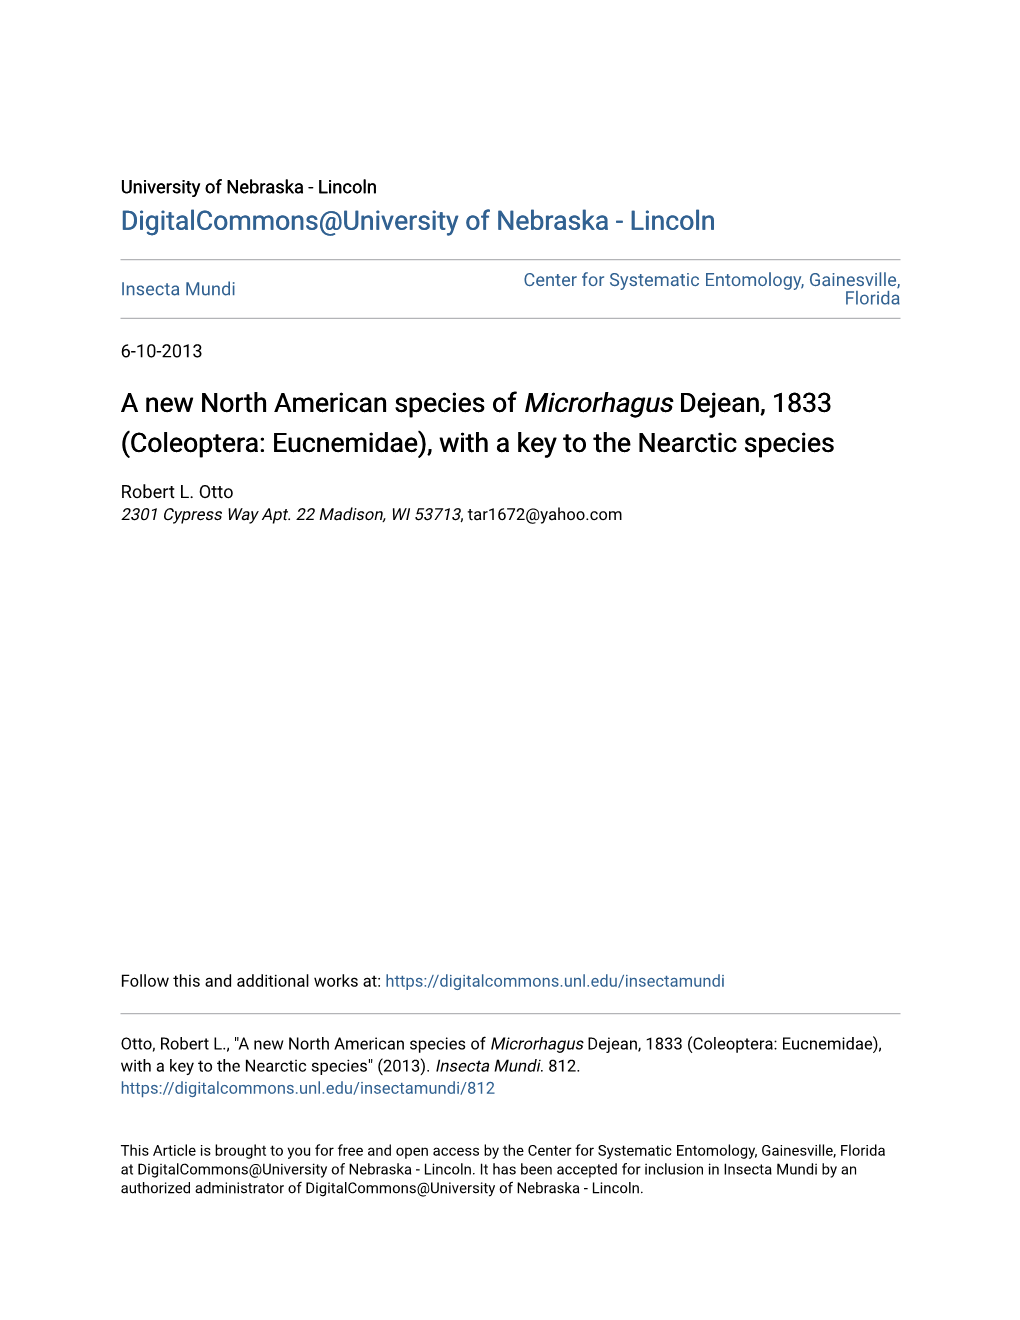 A New North American Species of Microrhagus Dejean, 1833 (Coleoptera: Eucnemidae), with a Key to the Nearctic Species